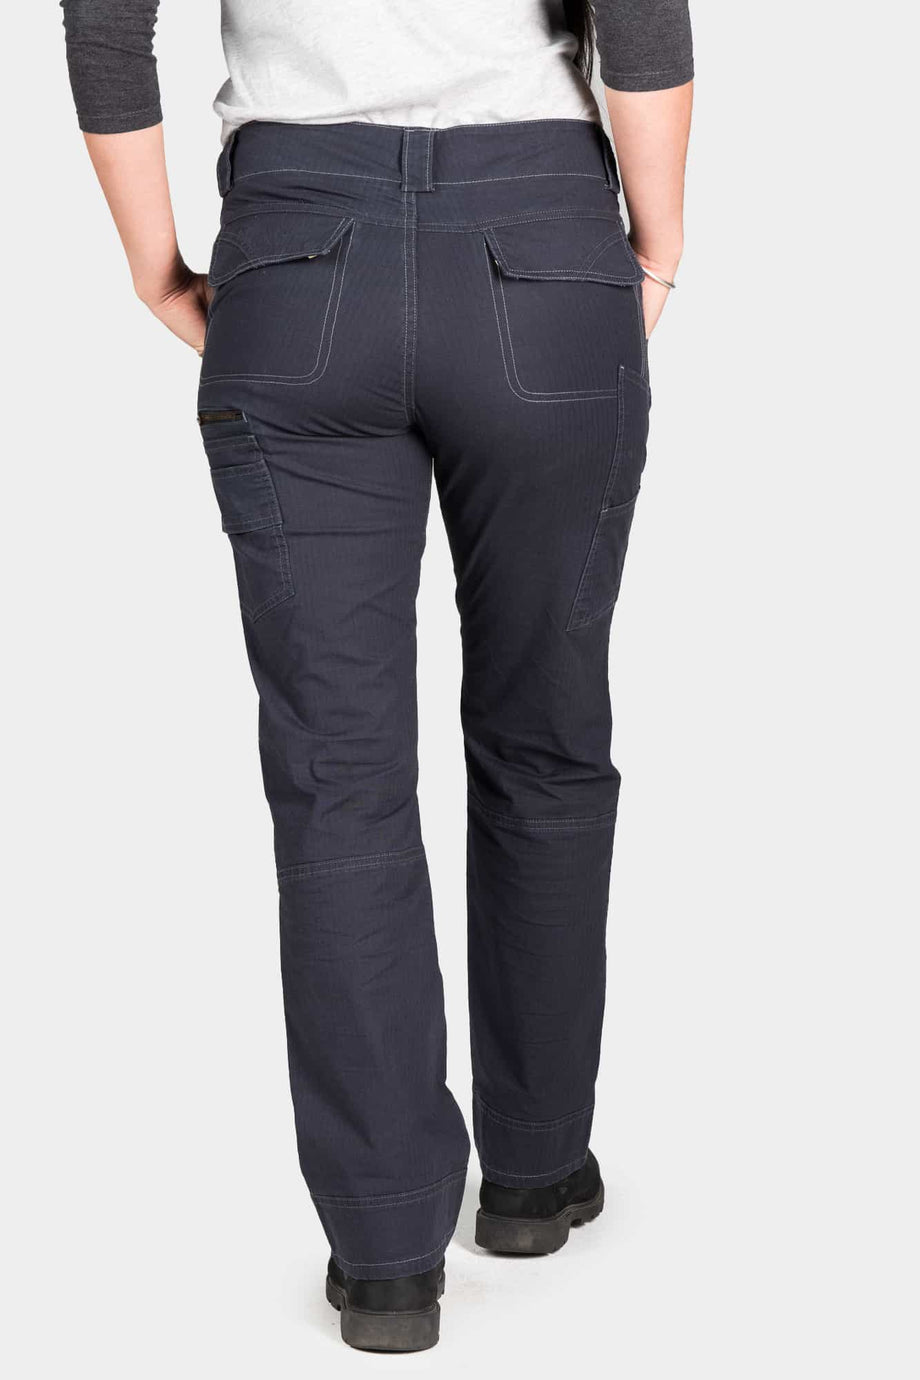 Buy FXD Women's Stretch Ripstop Work Pants - WP-7W Online